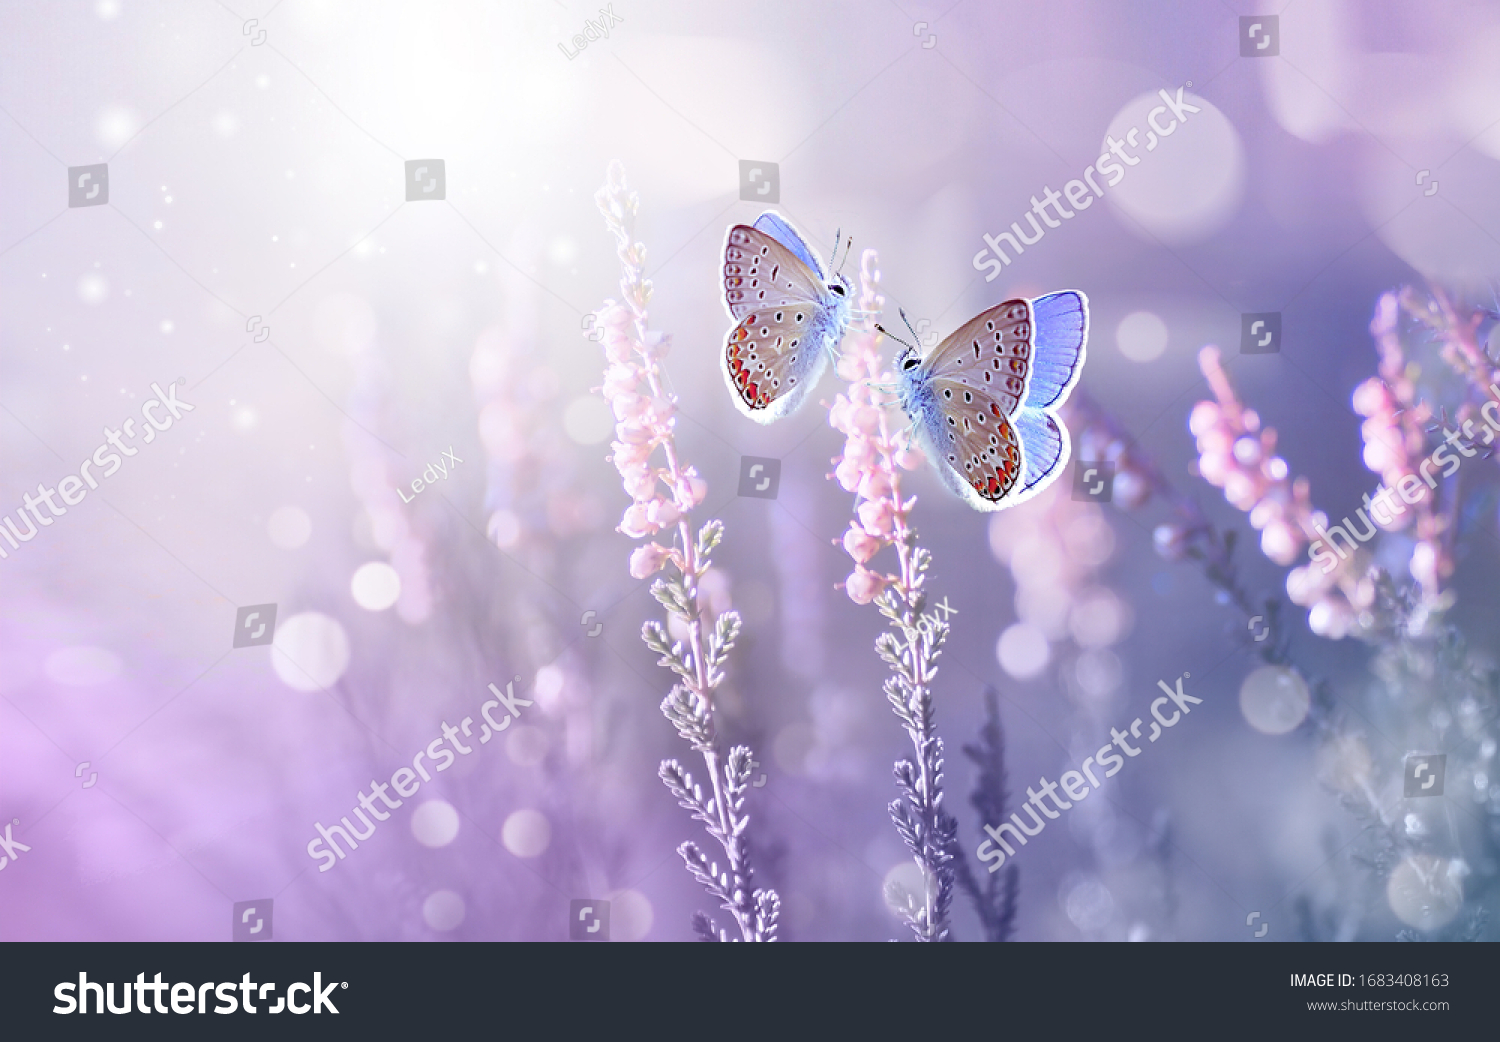 Amazing beautiful colorful natural scenery. Lavender flowers and two butterfly in rays of summer sunlight in spring outdoors on nature macro, soft focus. Atmospheric photo, gentle artistic image.